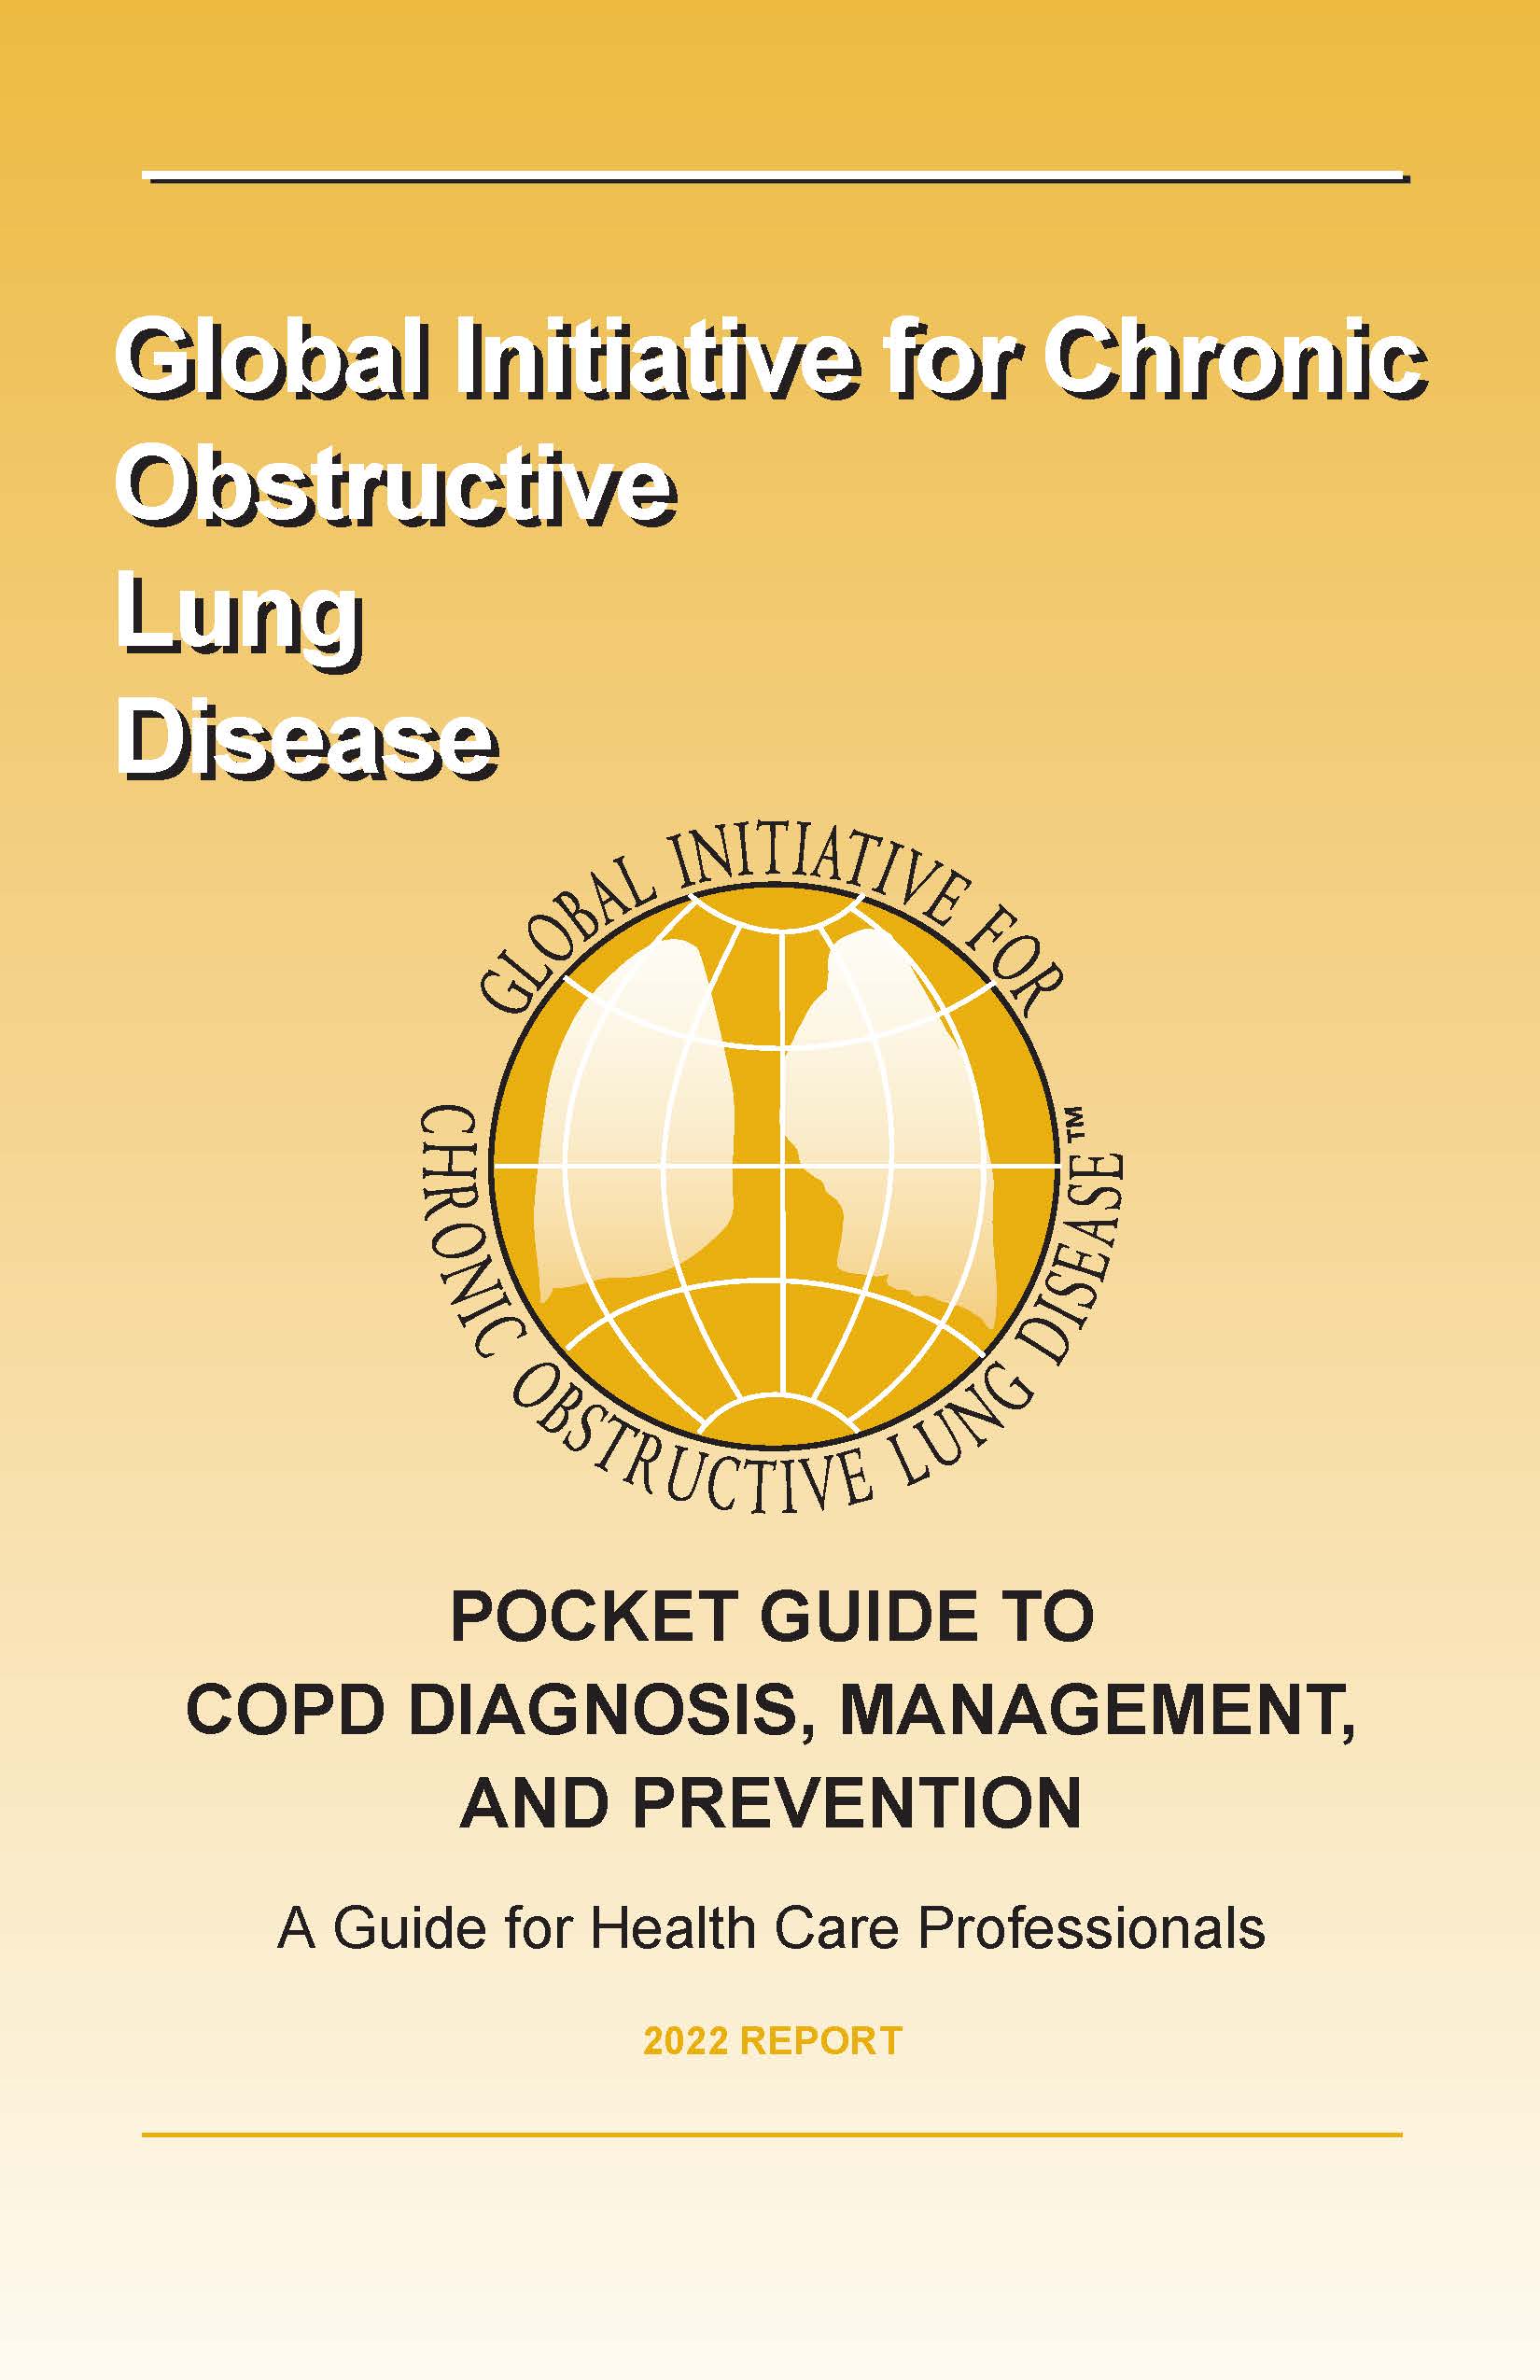 GOLD Pocket Guide 2022 Front Cover Global Initiative for Chronic